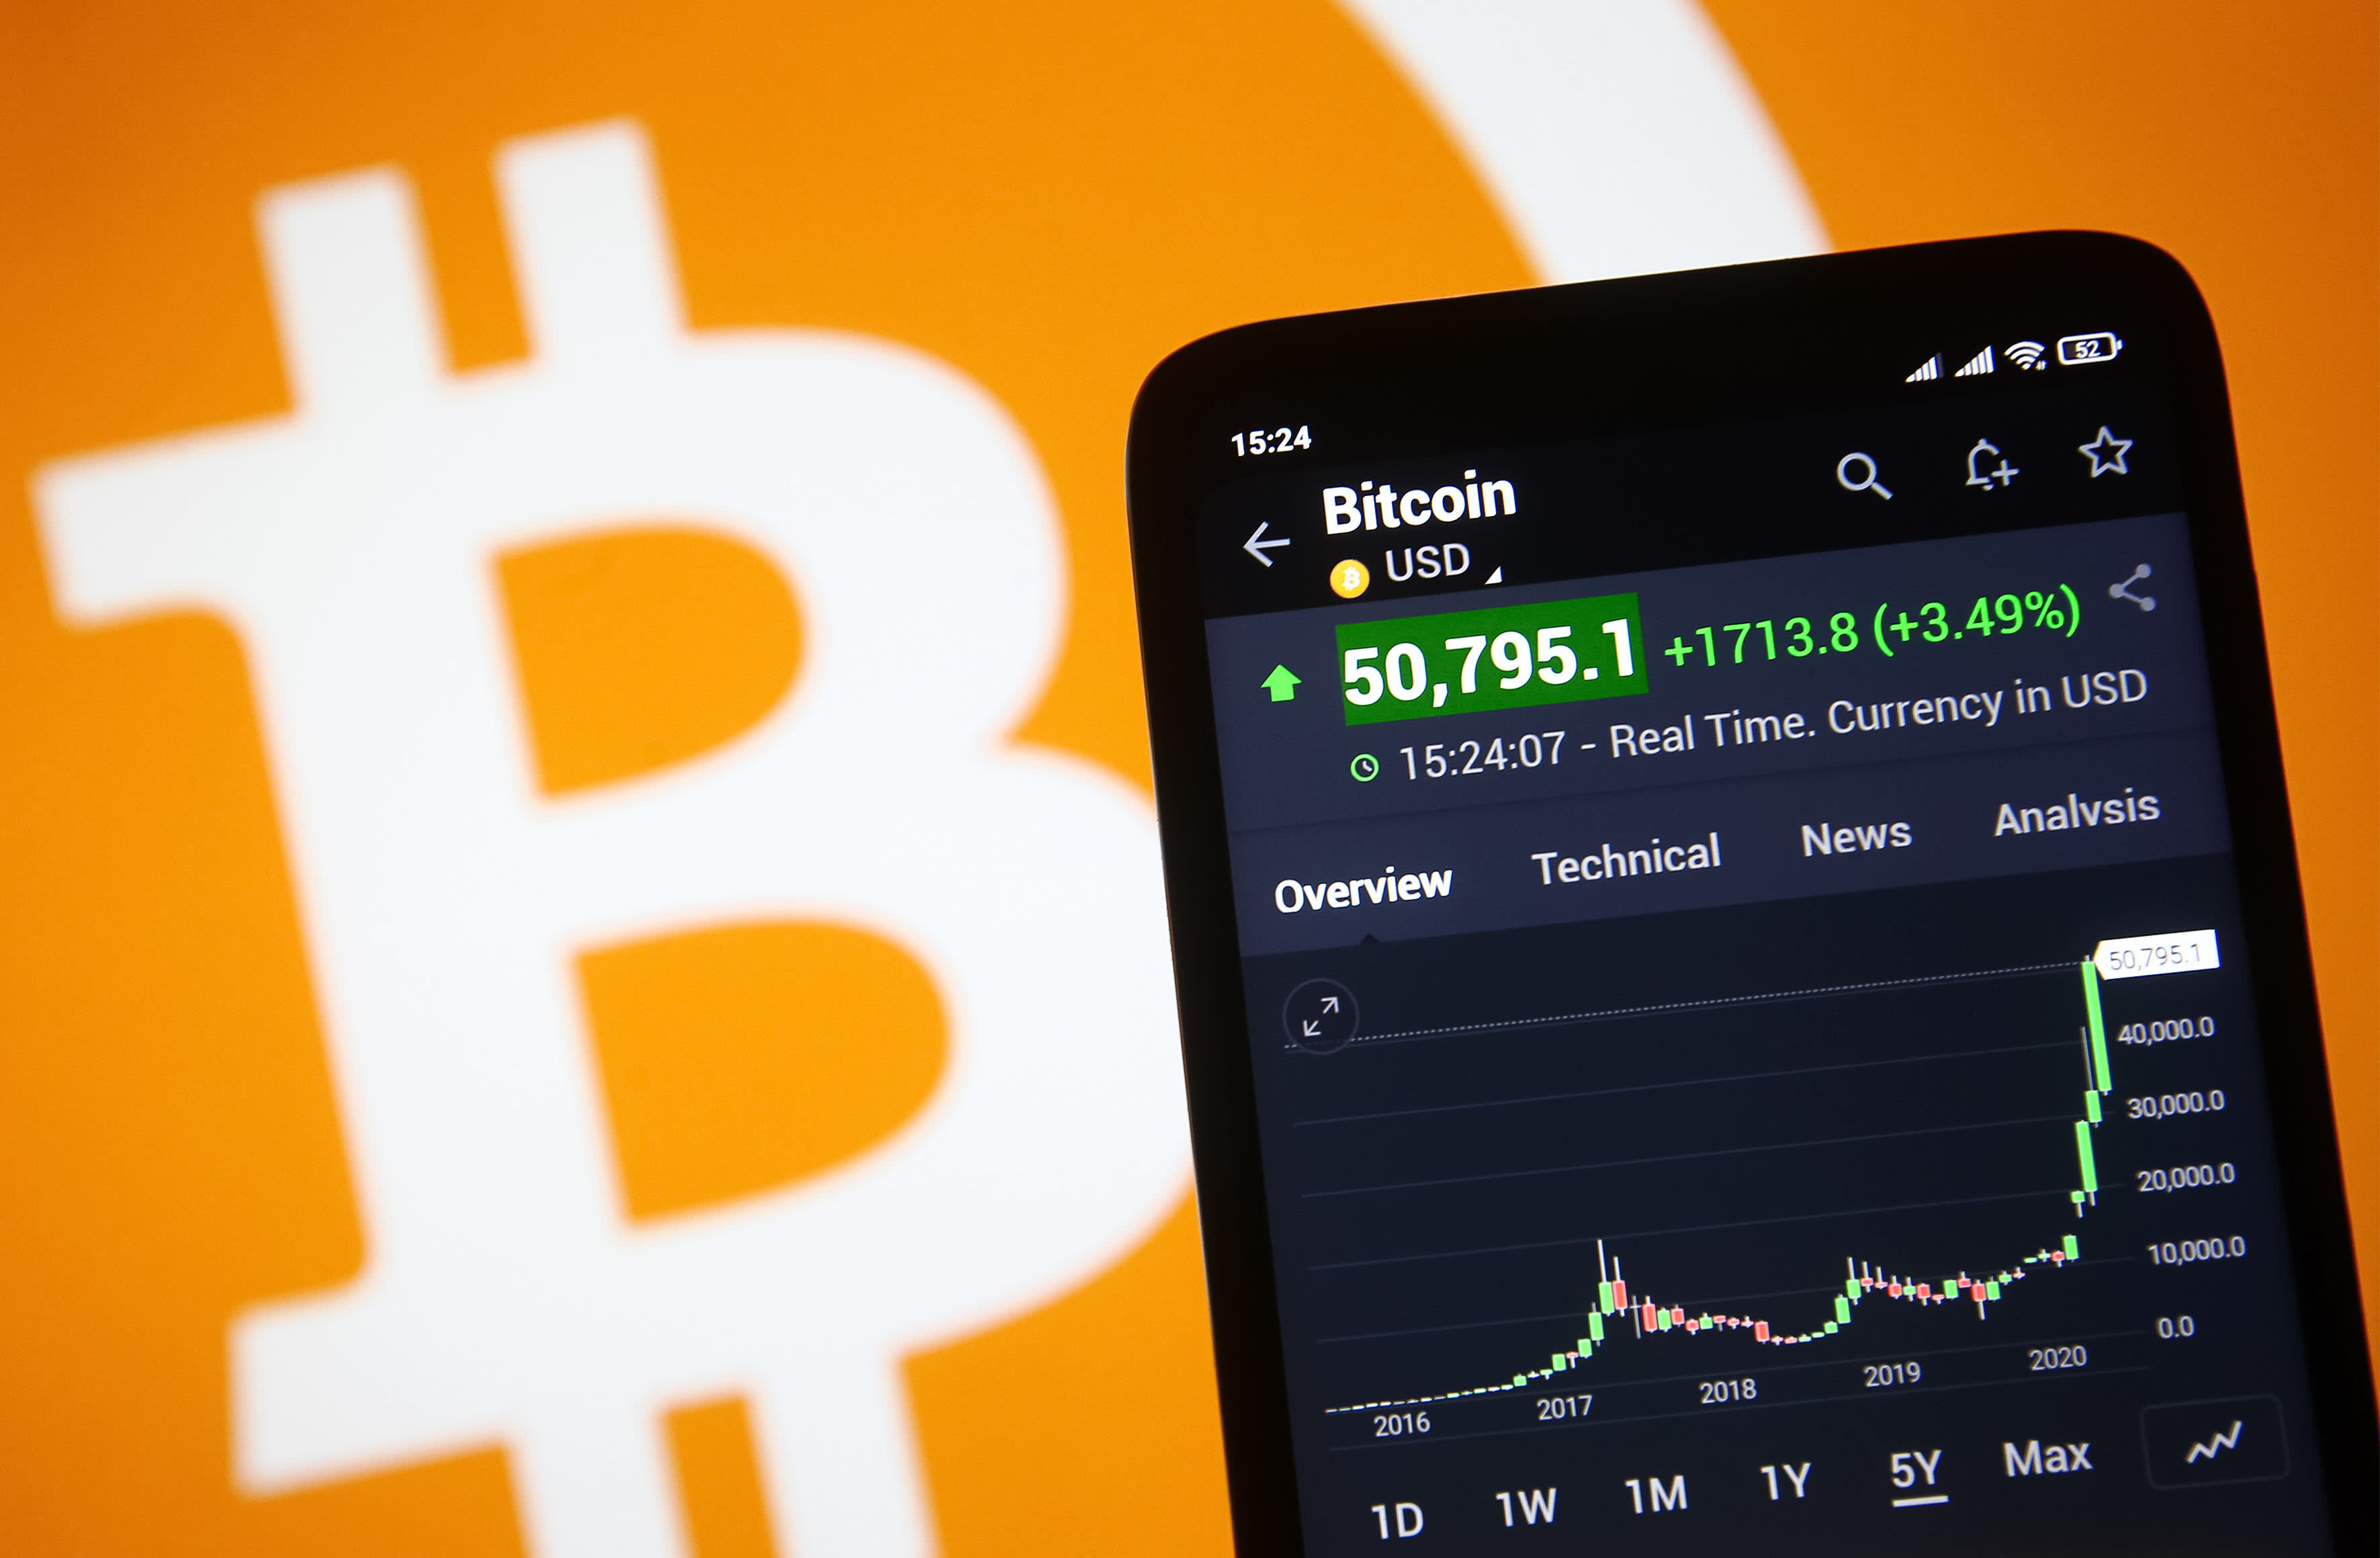 Bitcoin (BTC) rises above $ 50,000 after more Square purchases